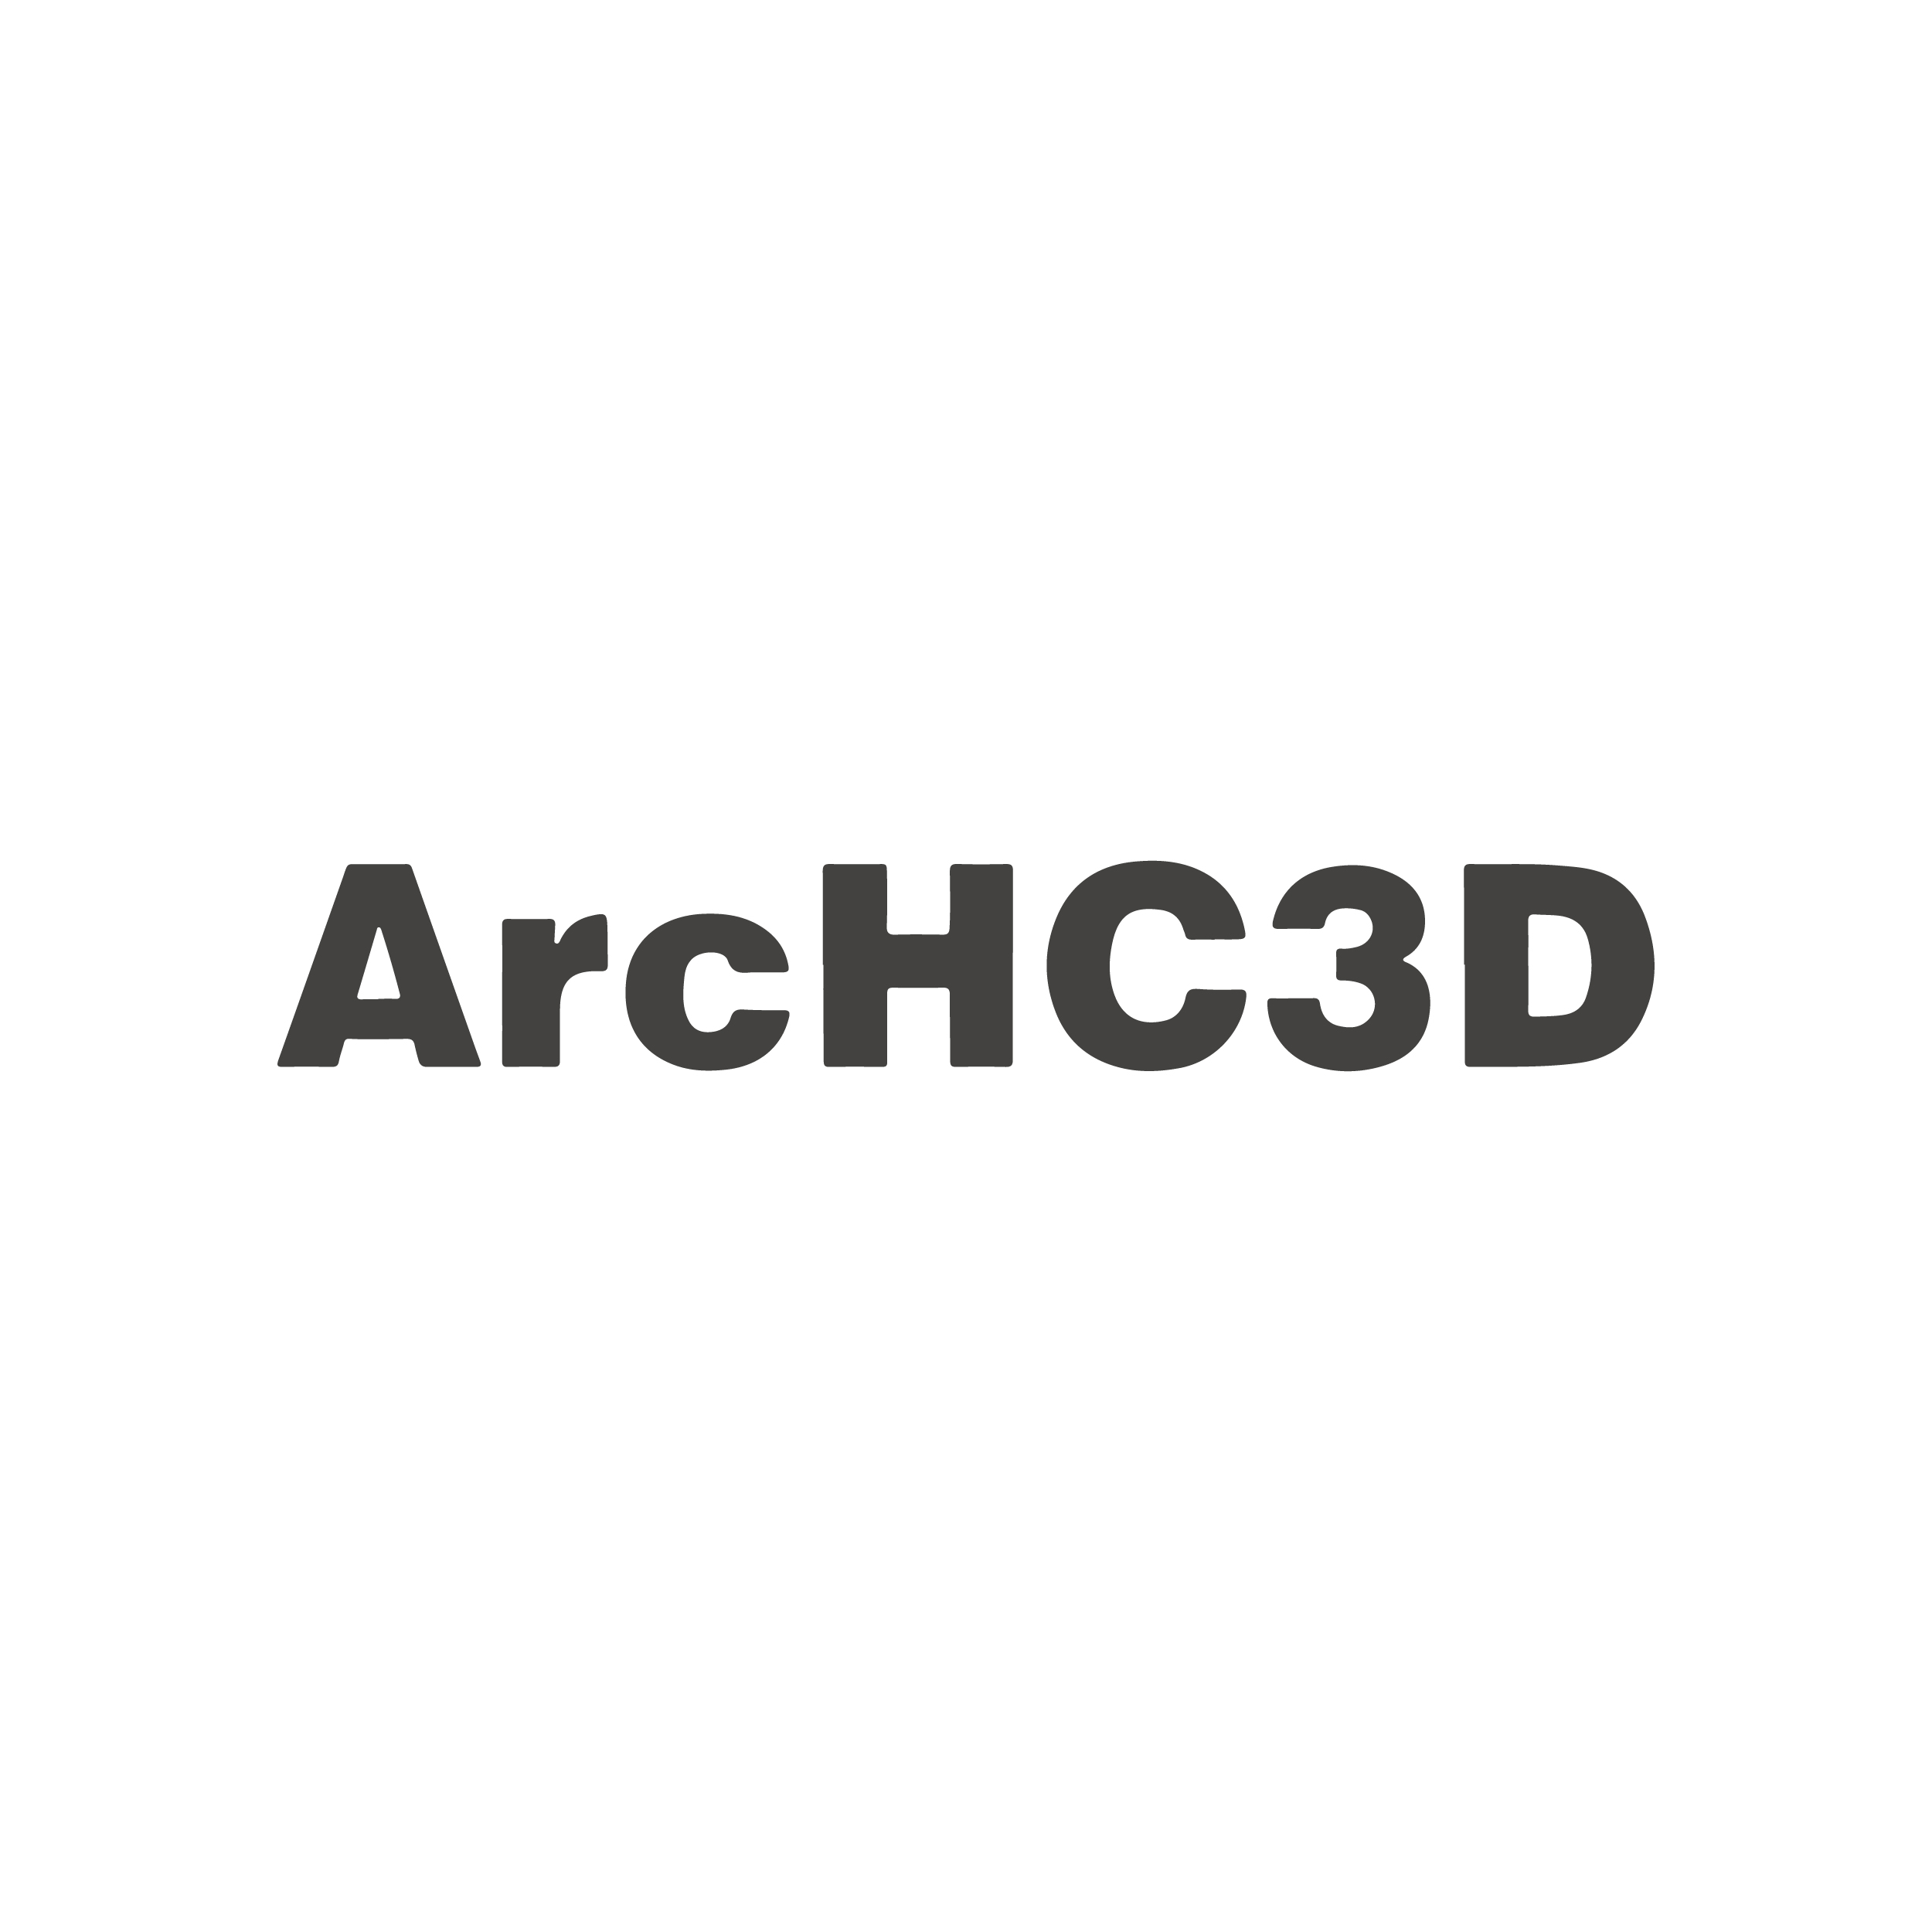 ARCHC 3D - ARCHITECTURAL HERITAGE CONSERVATION RESEARCH GROUP